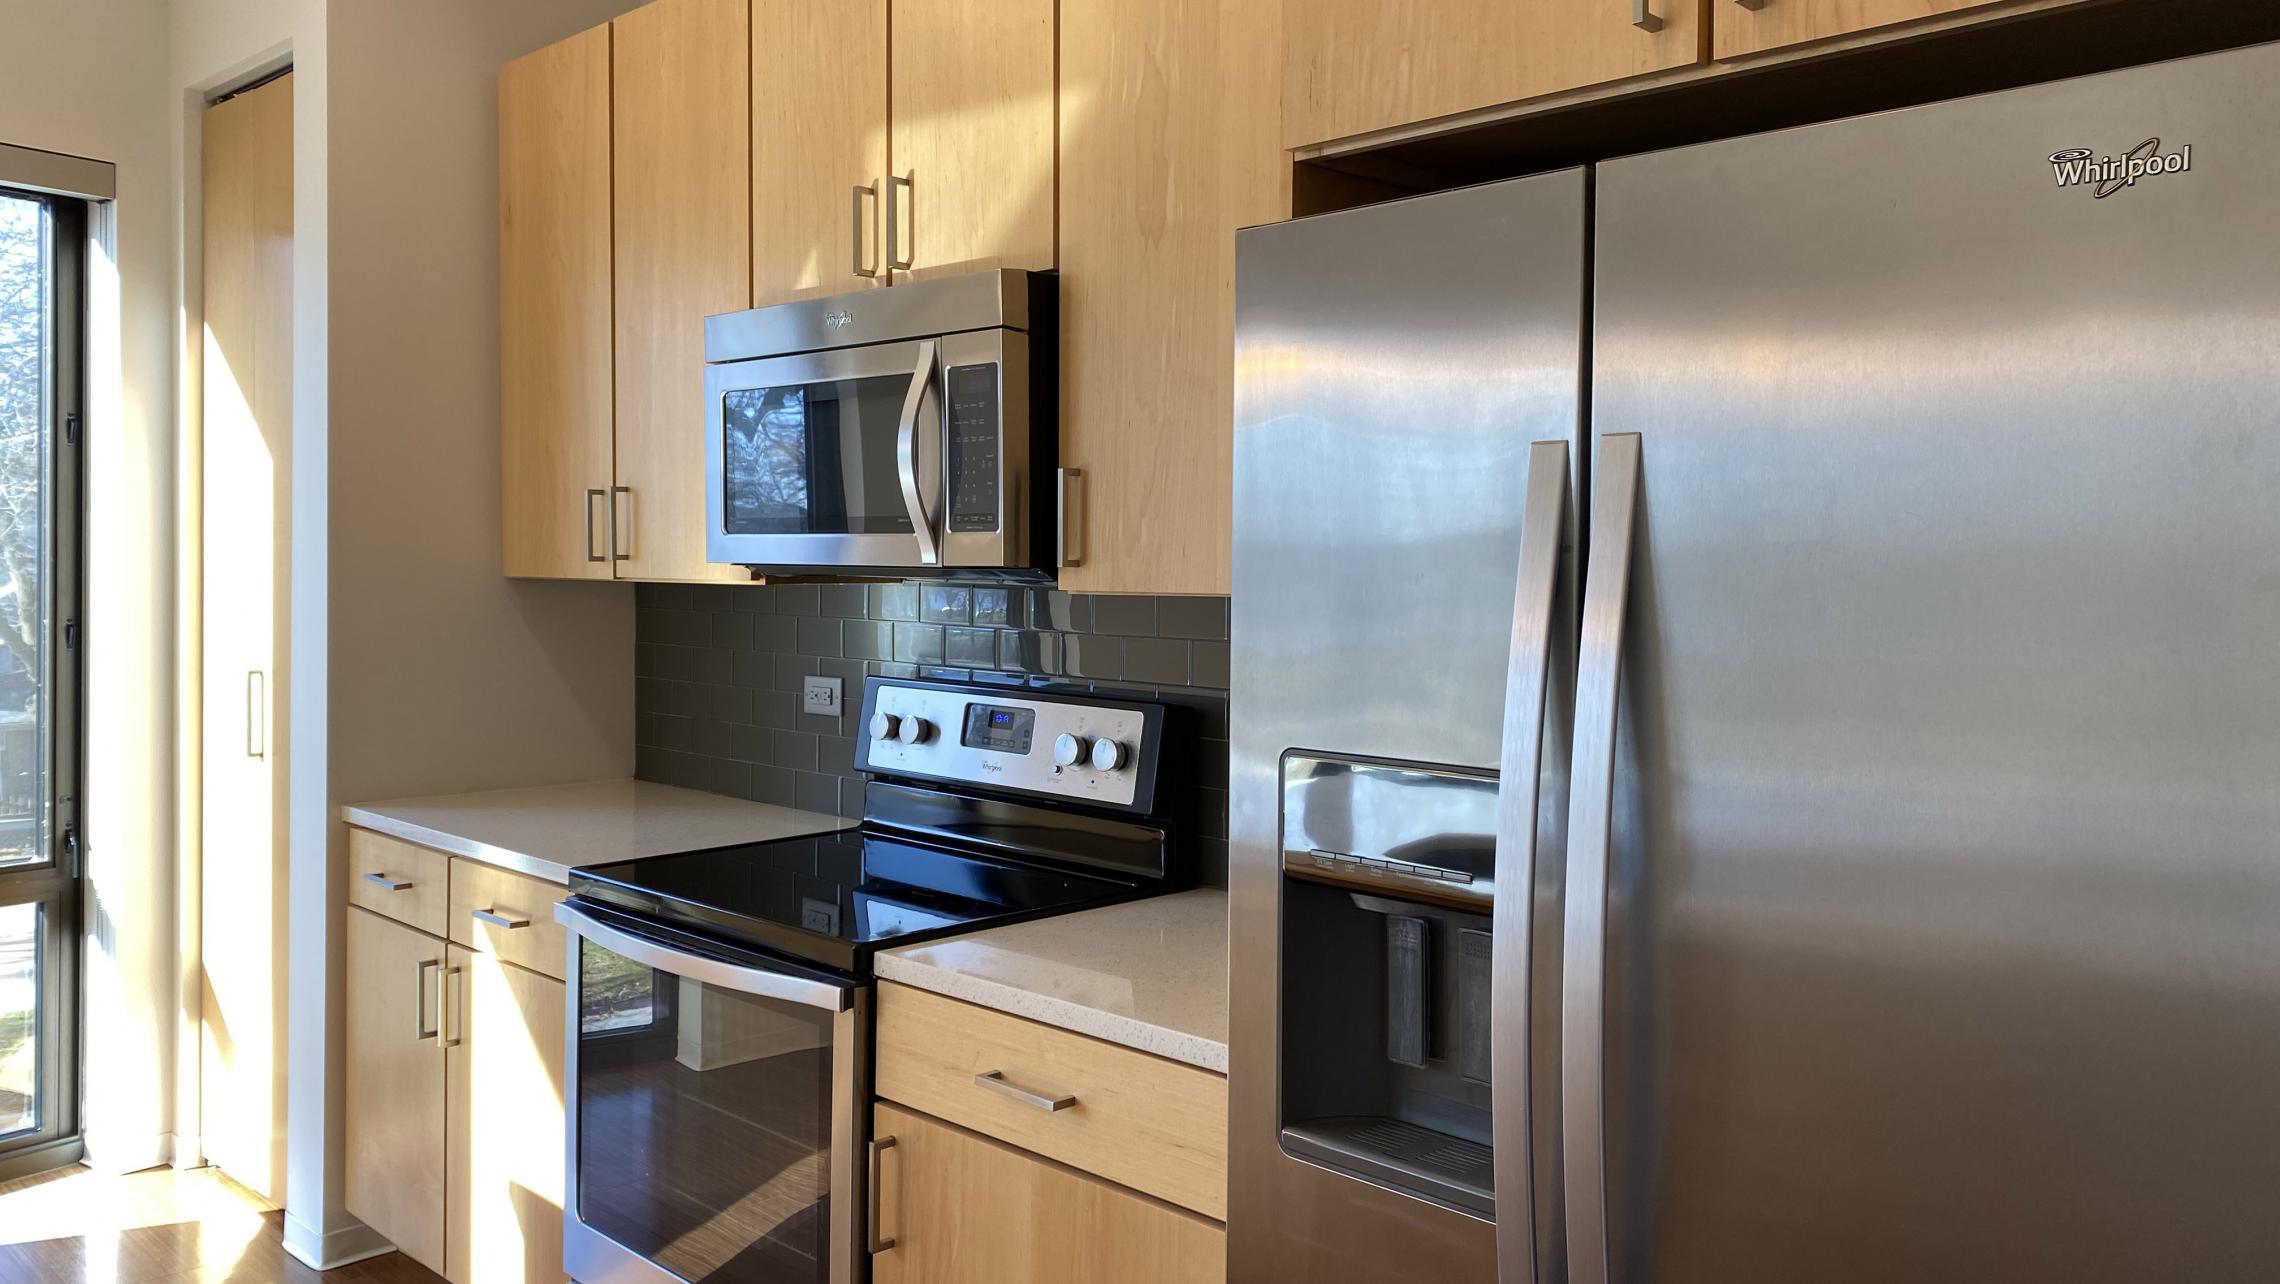 SEVEN27-at-The-Yards-Apartment-204-One-Bedroom-Modern-Upscale-Luxury-Design-Radiant-Heating-Fitness-Lounge-Fireplace-Courtyard-Downtown-Madison-Cats-Dogs-Lifestyle-Natural-Light-Lake-View